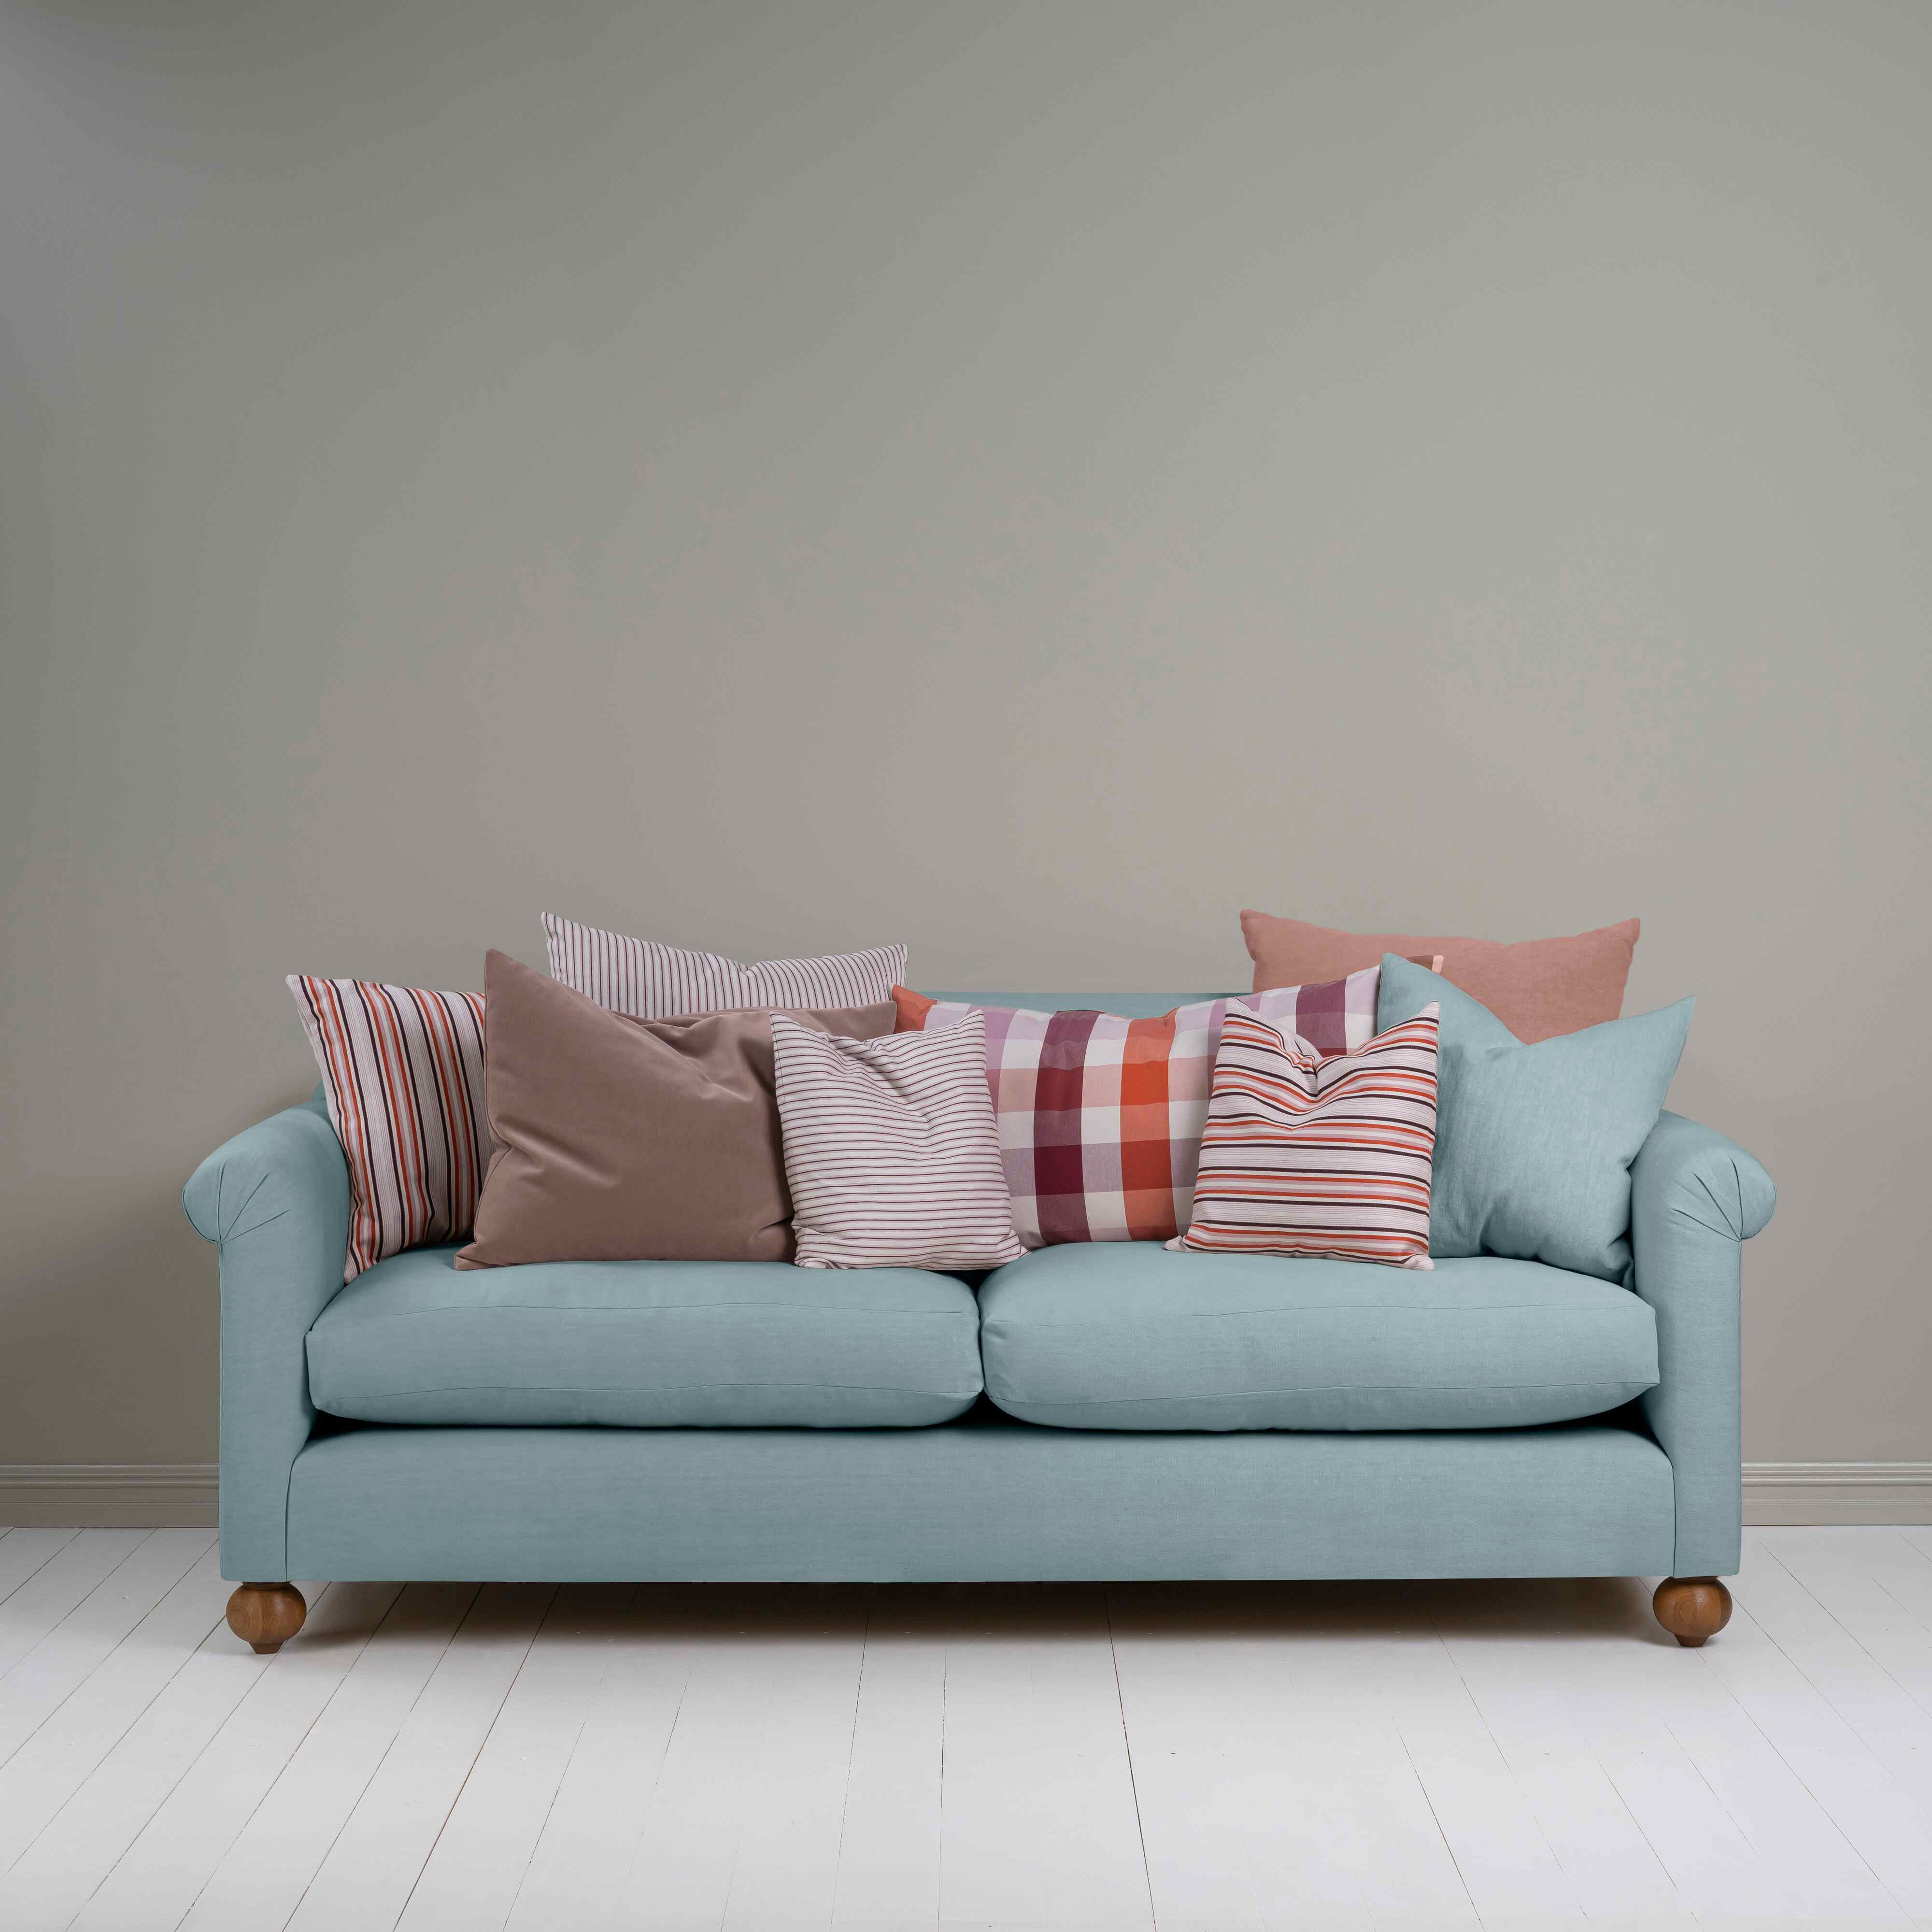  Dolittle 4 seater Sofa in Laidback Linen Cerulean 